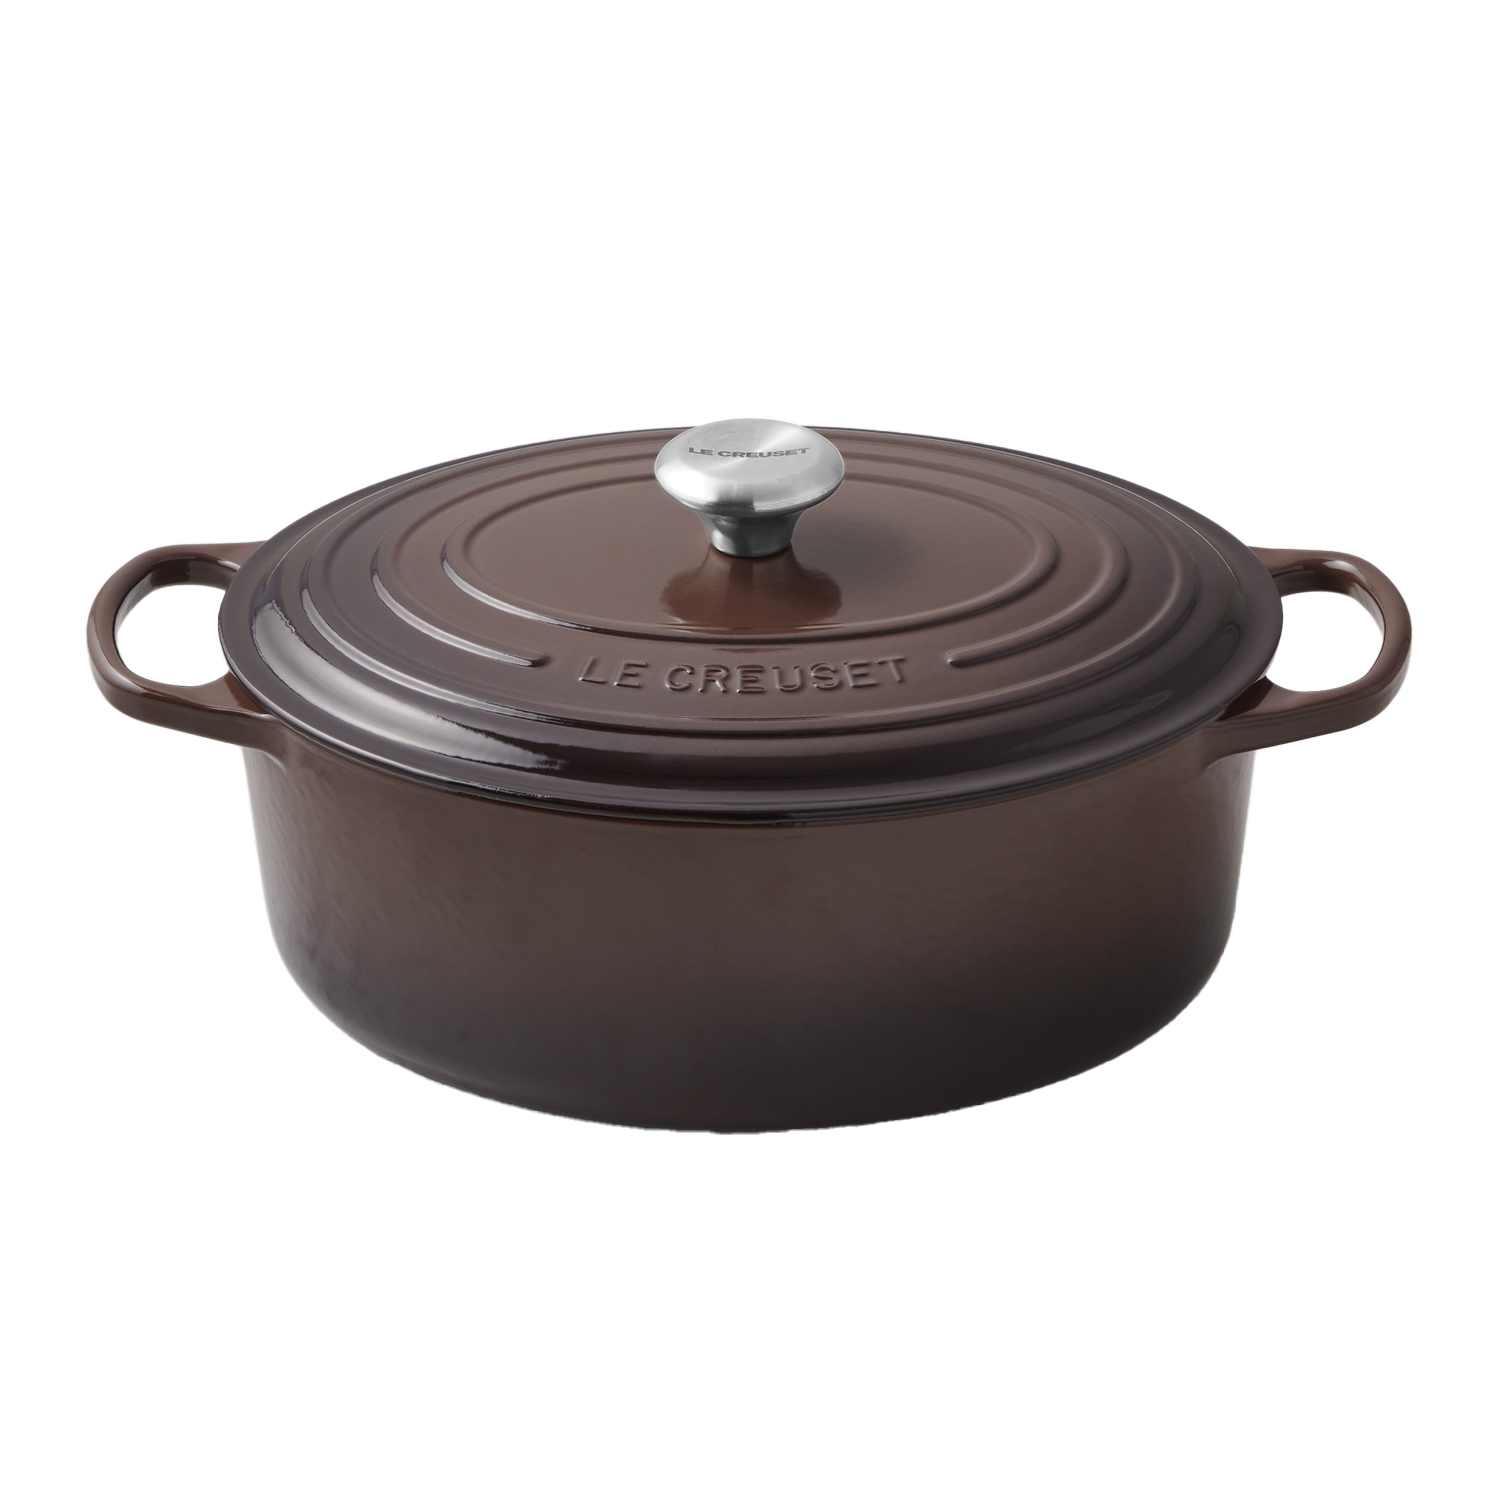 WS le creuset oven